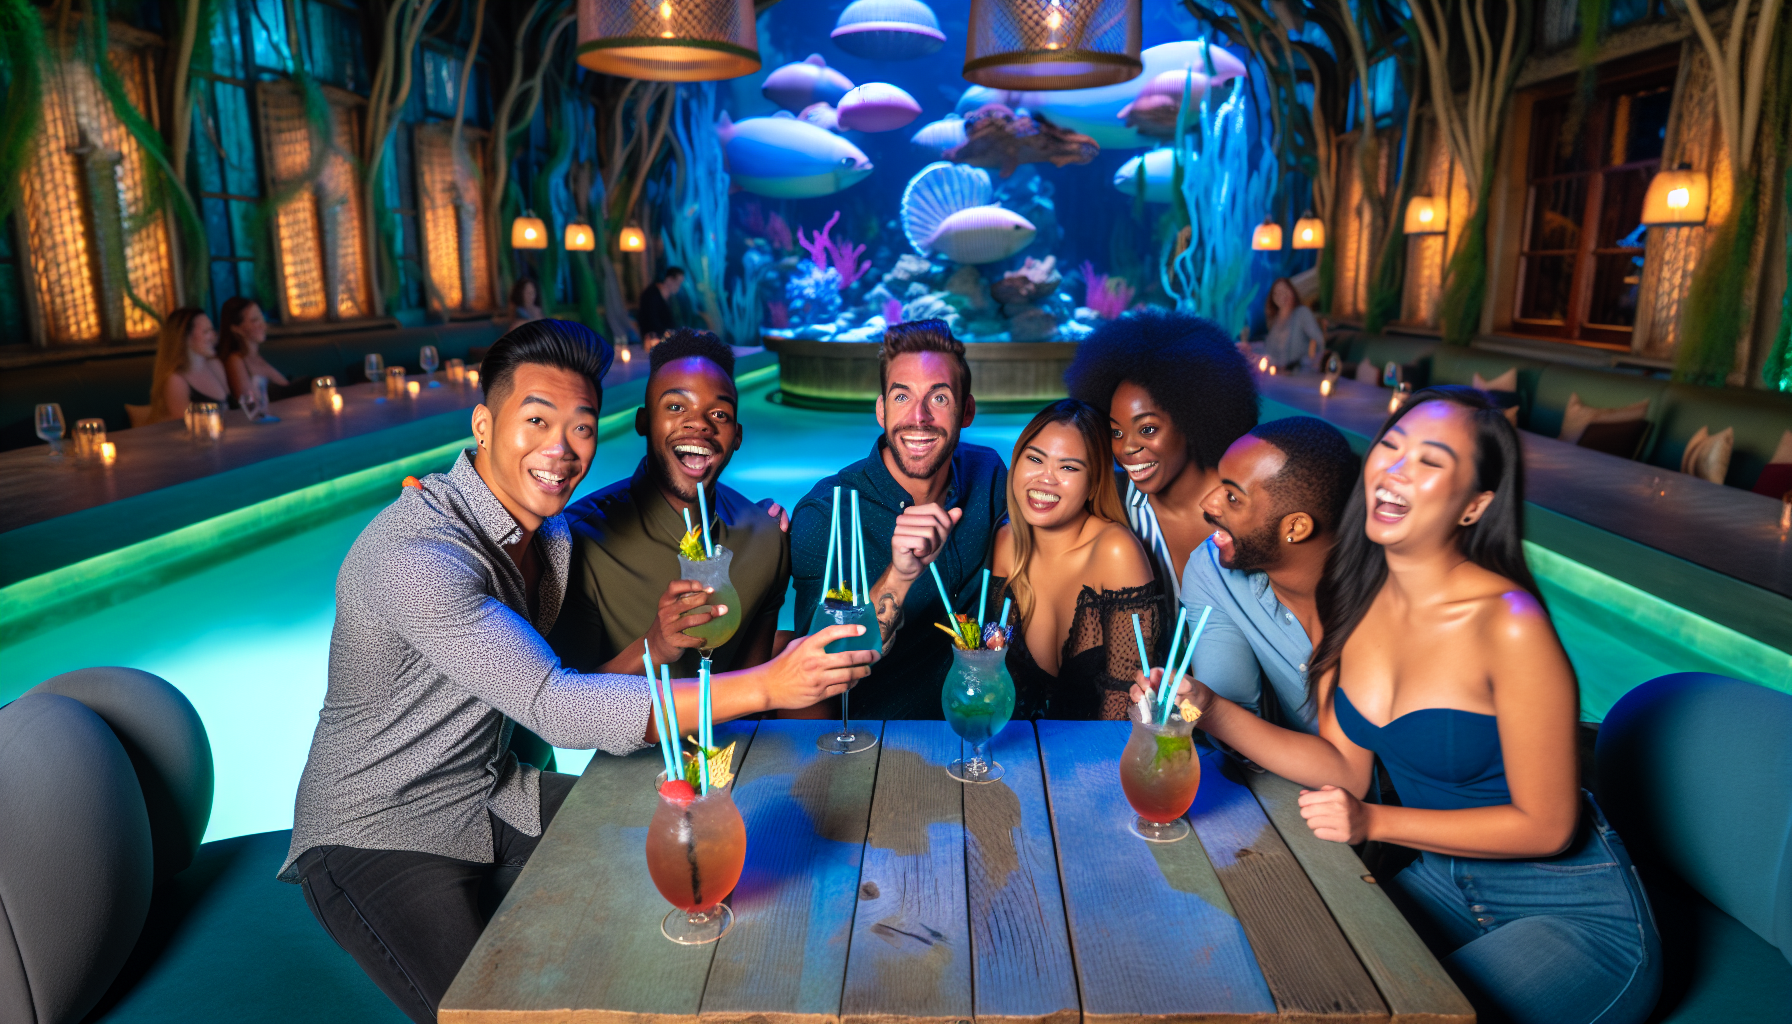 A group of friends celebrating with mermaid-themed cocktails and mocktails